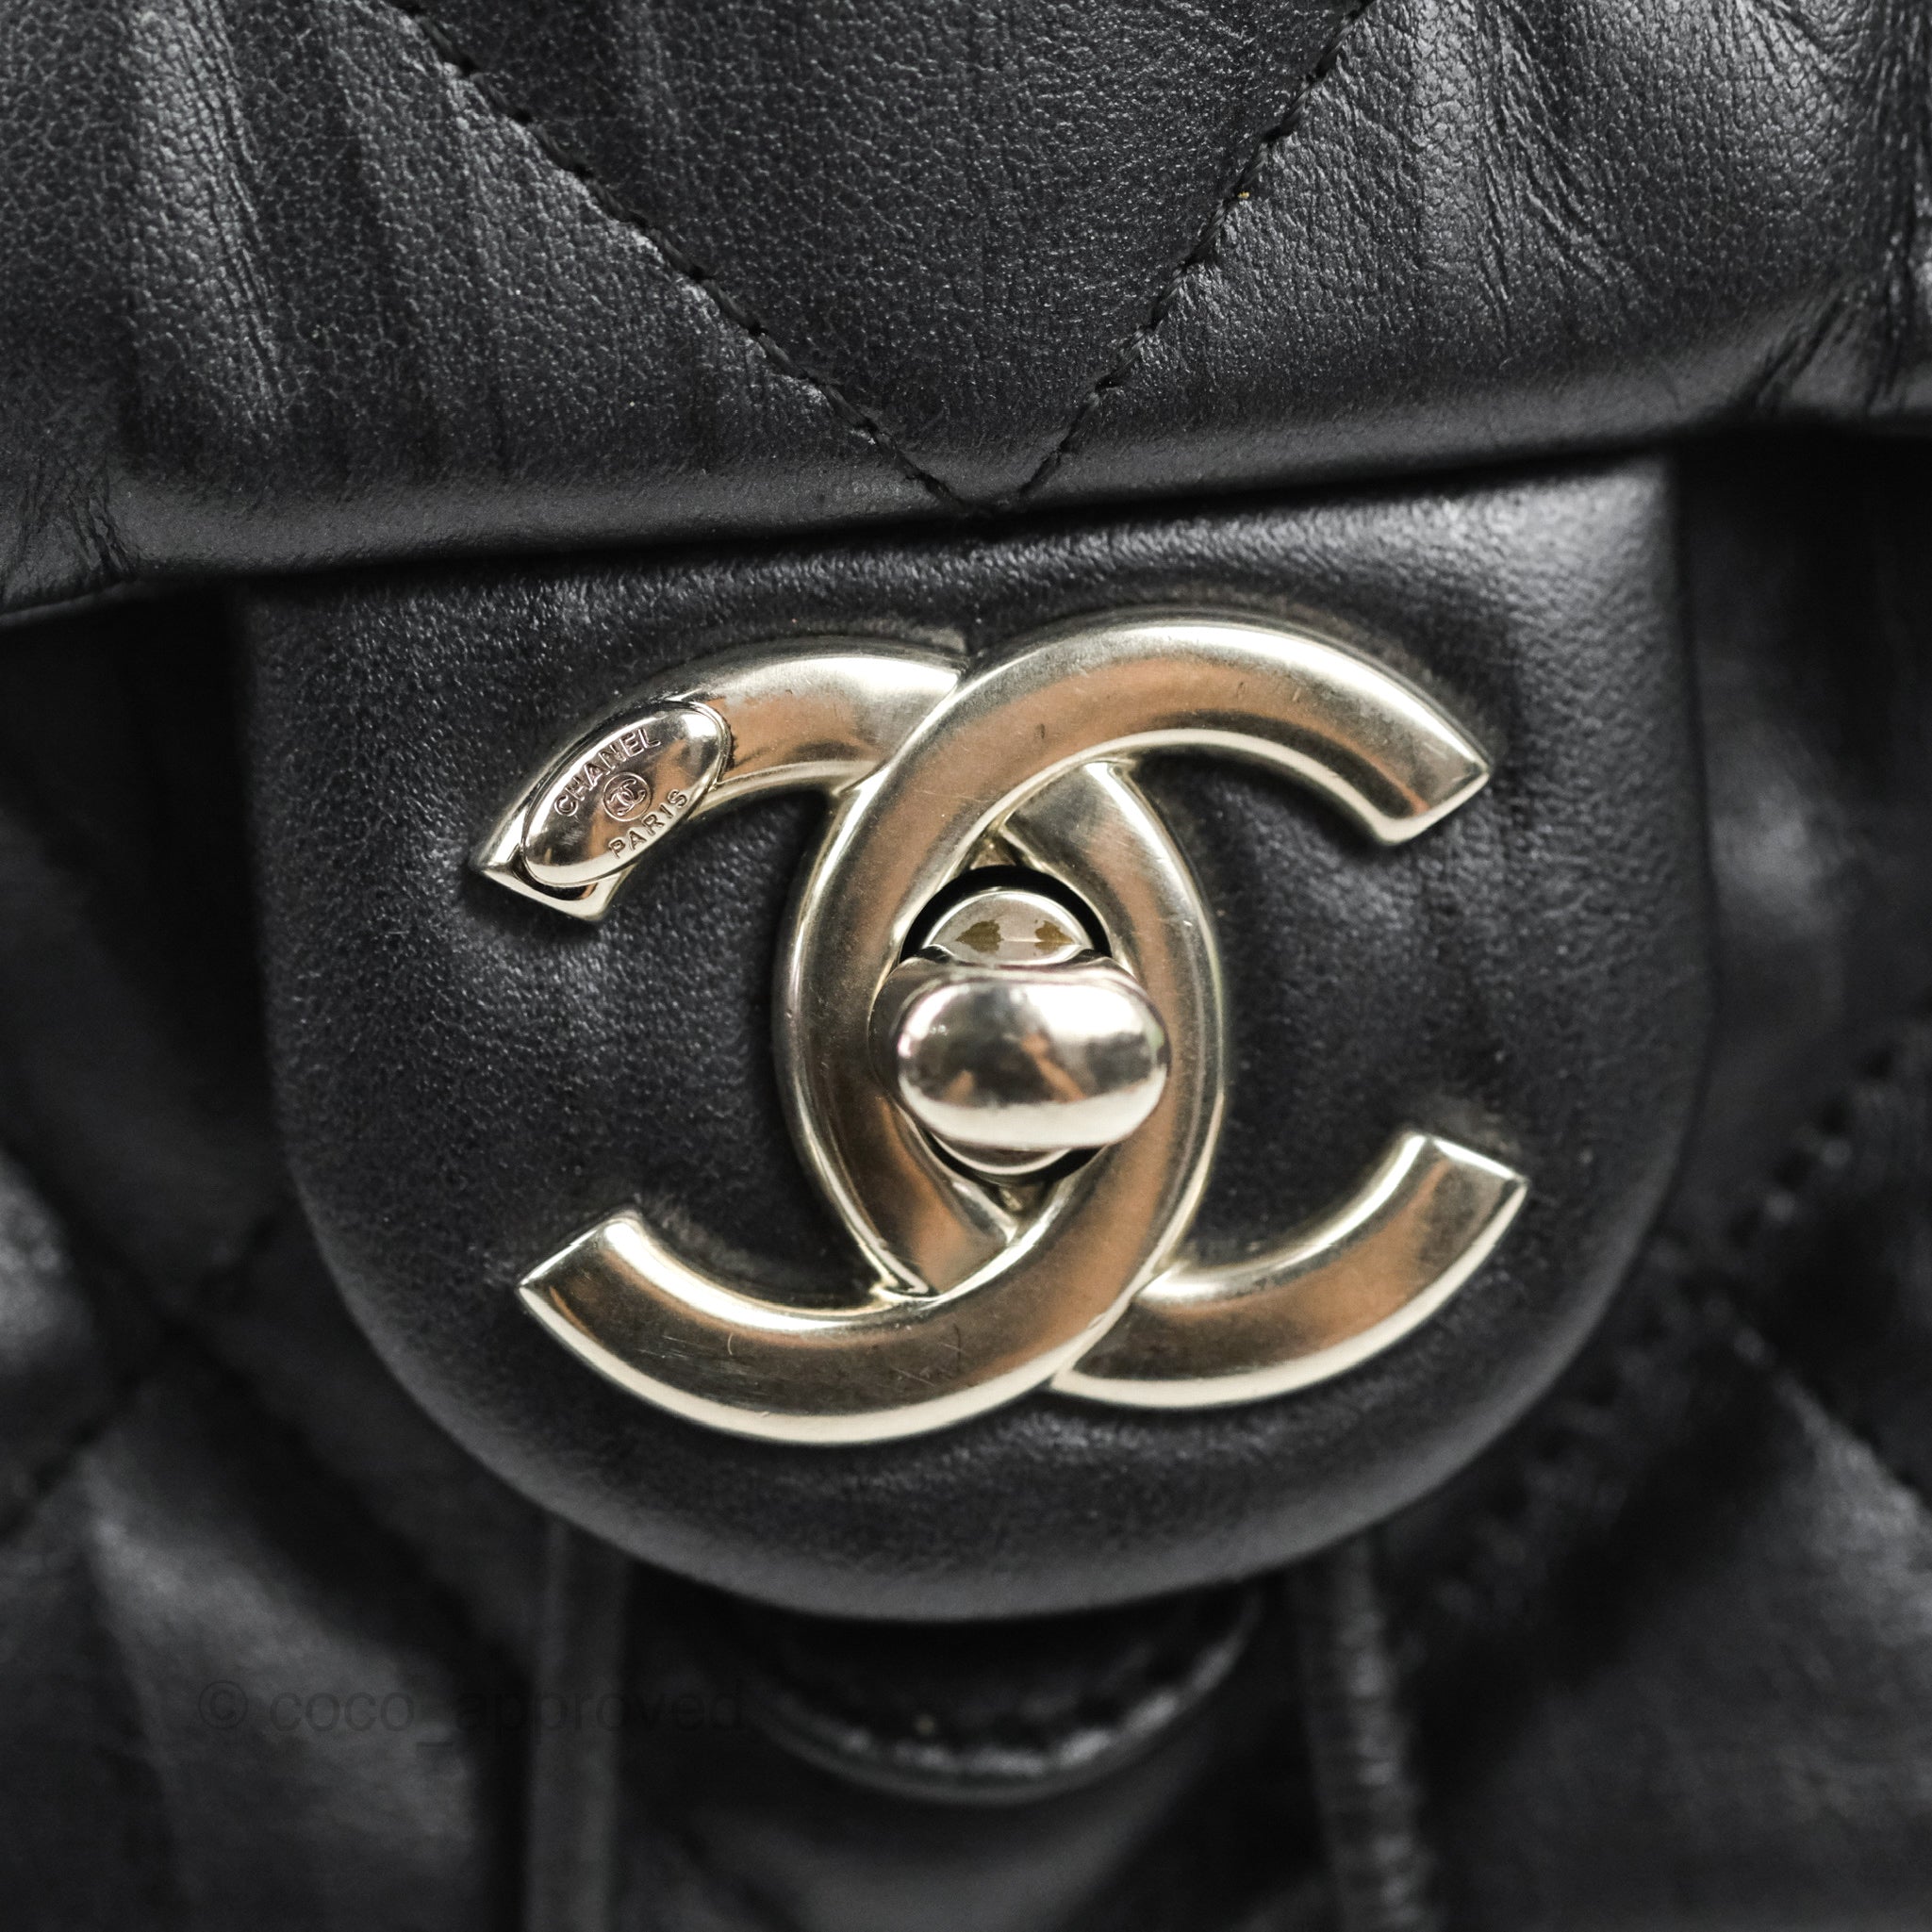 Chanel Ground Control Flap Backpack Quilted Iridescent Calfskin